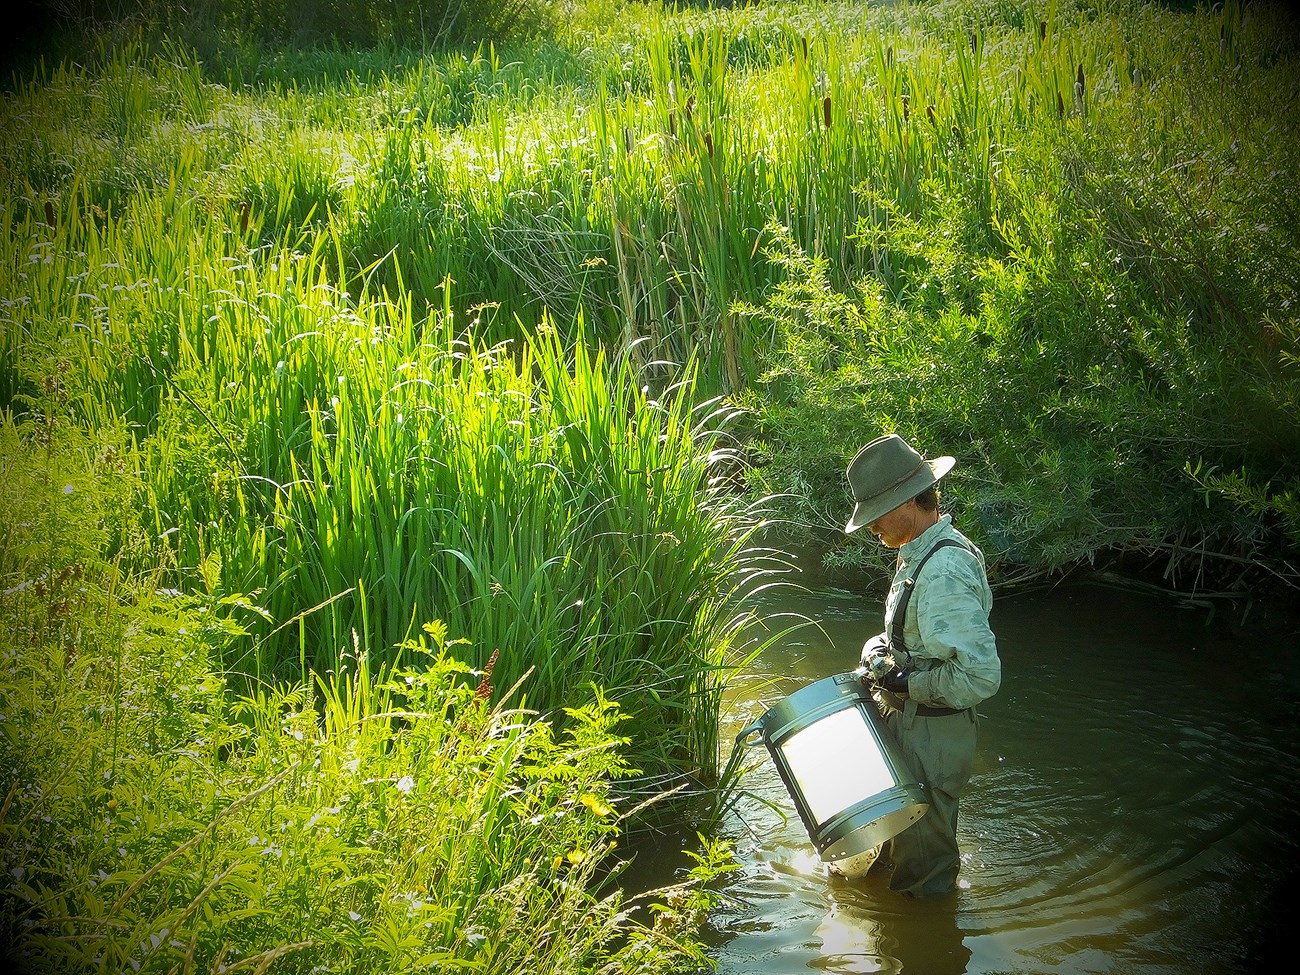 Man holds a Hess sampler as he stands in the Niobrara River surrounded by green vegetation